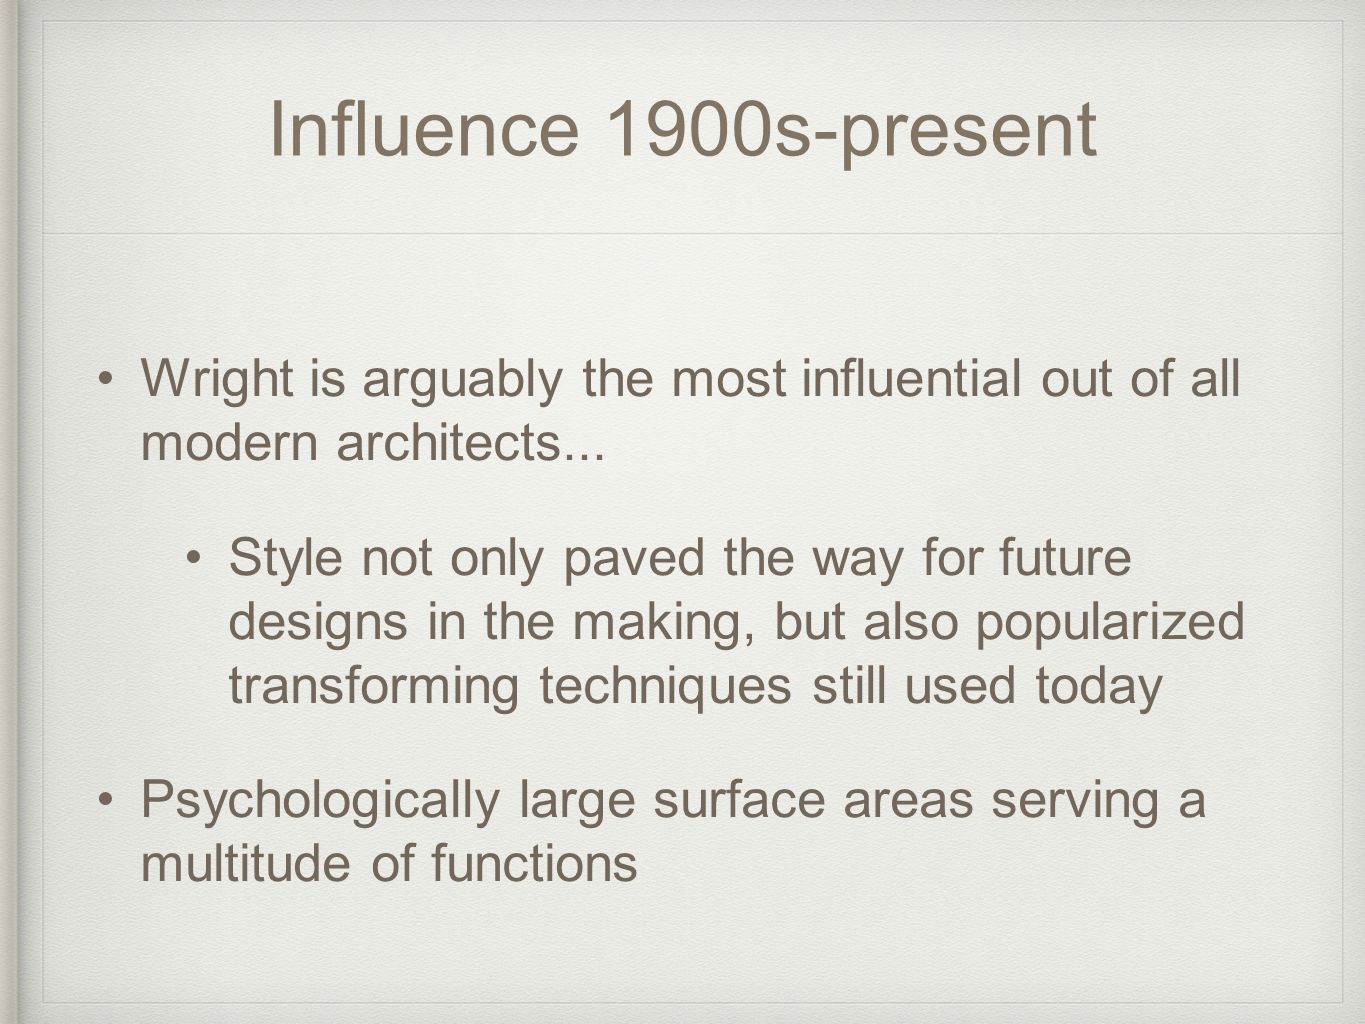 Influence 1900s-present Wright is arguably the most influential out of all modern architects...